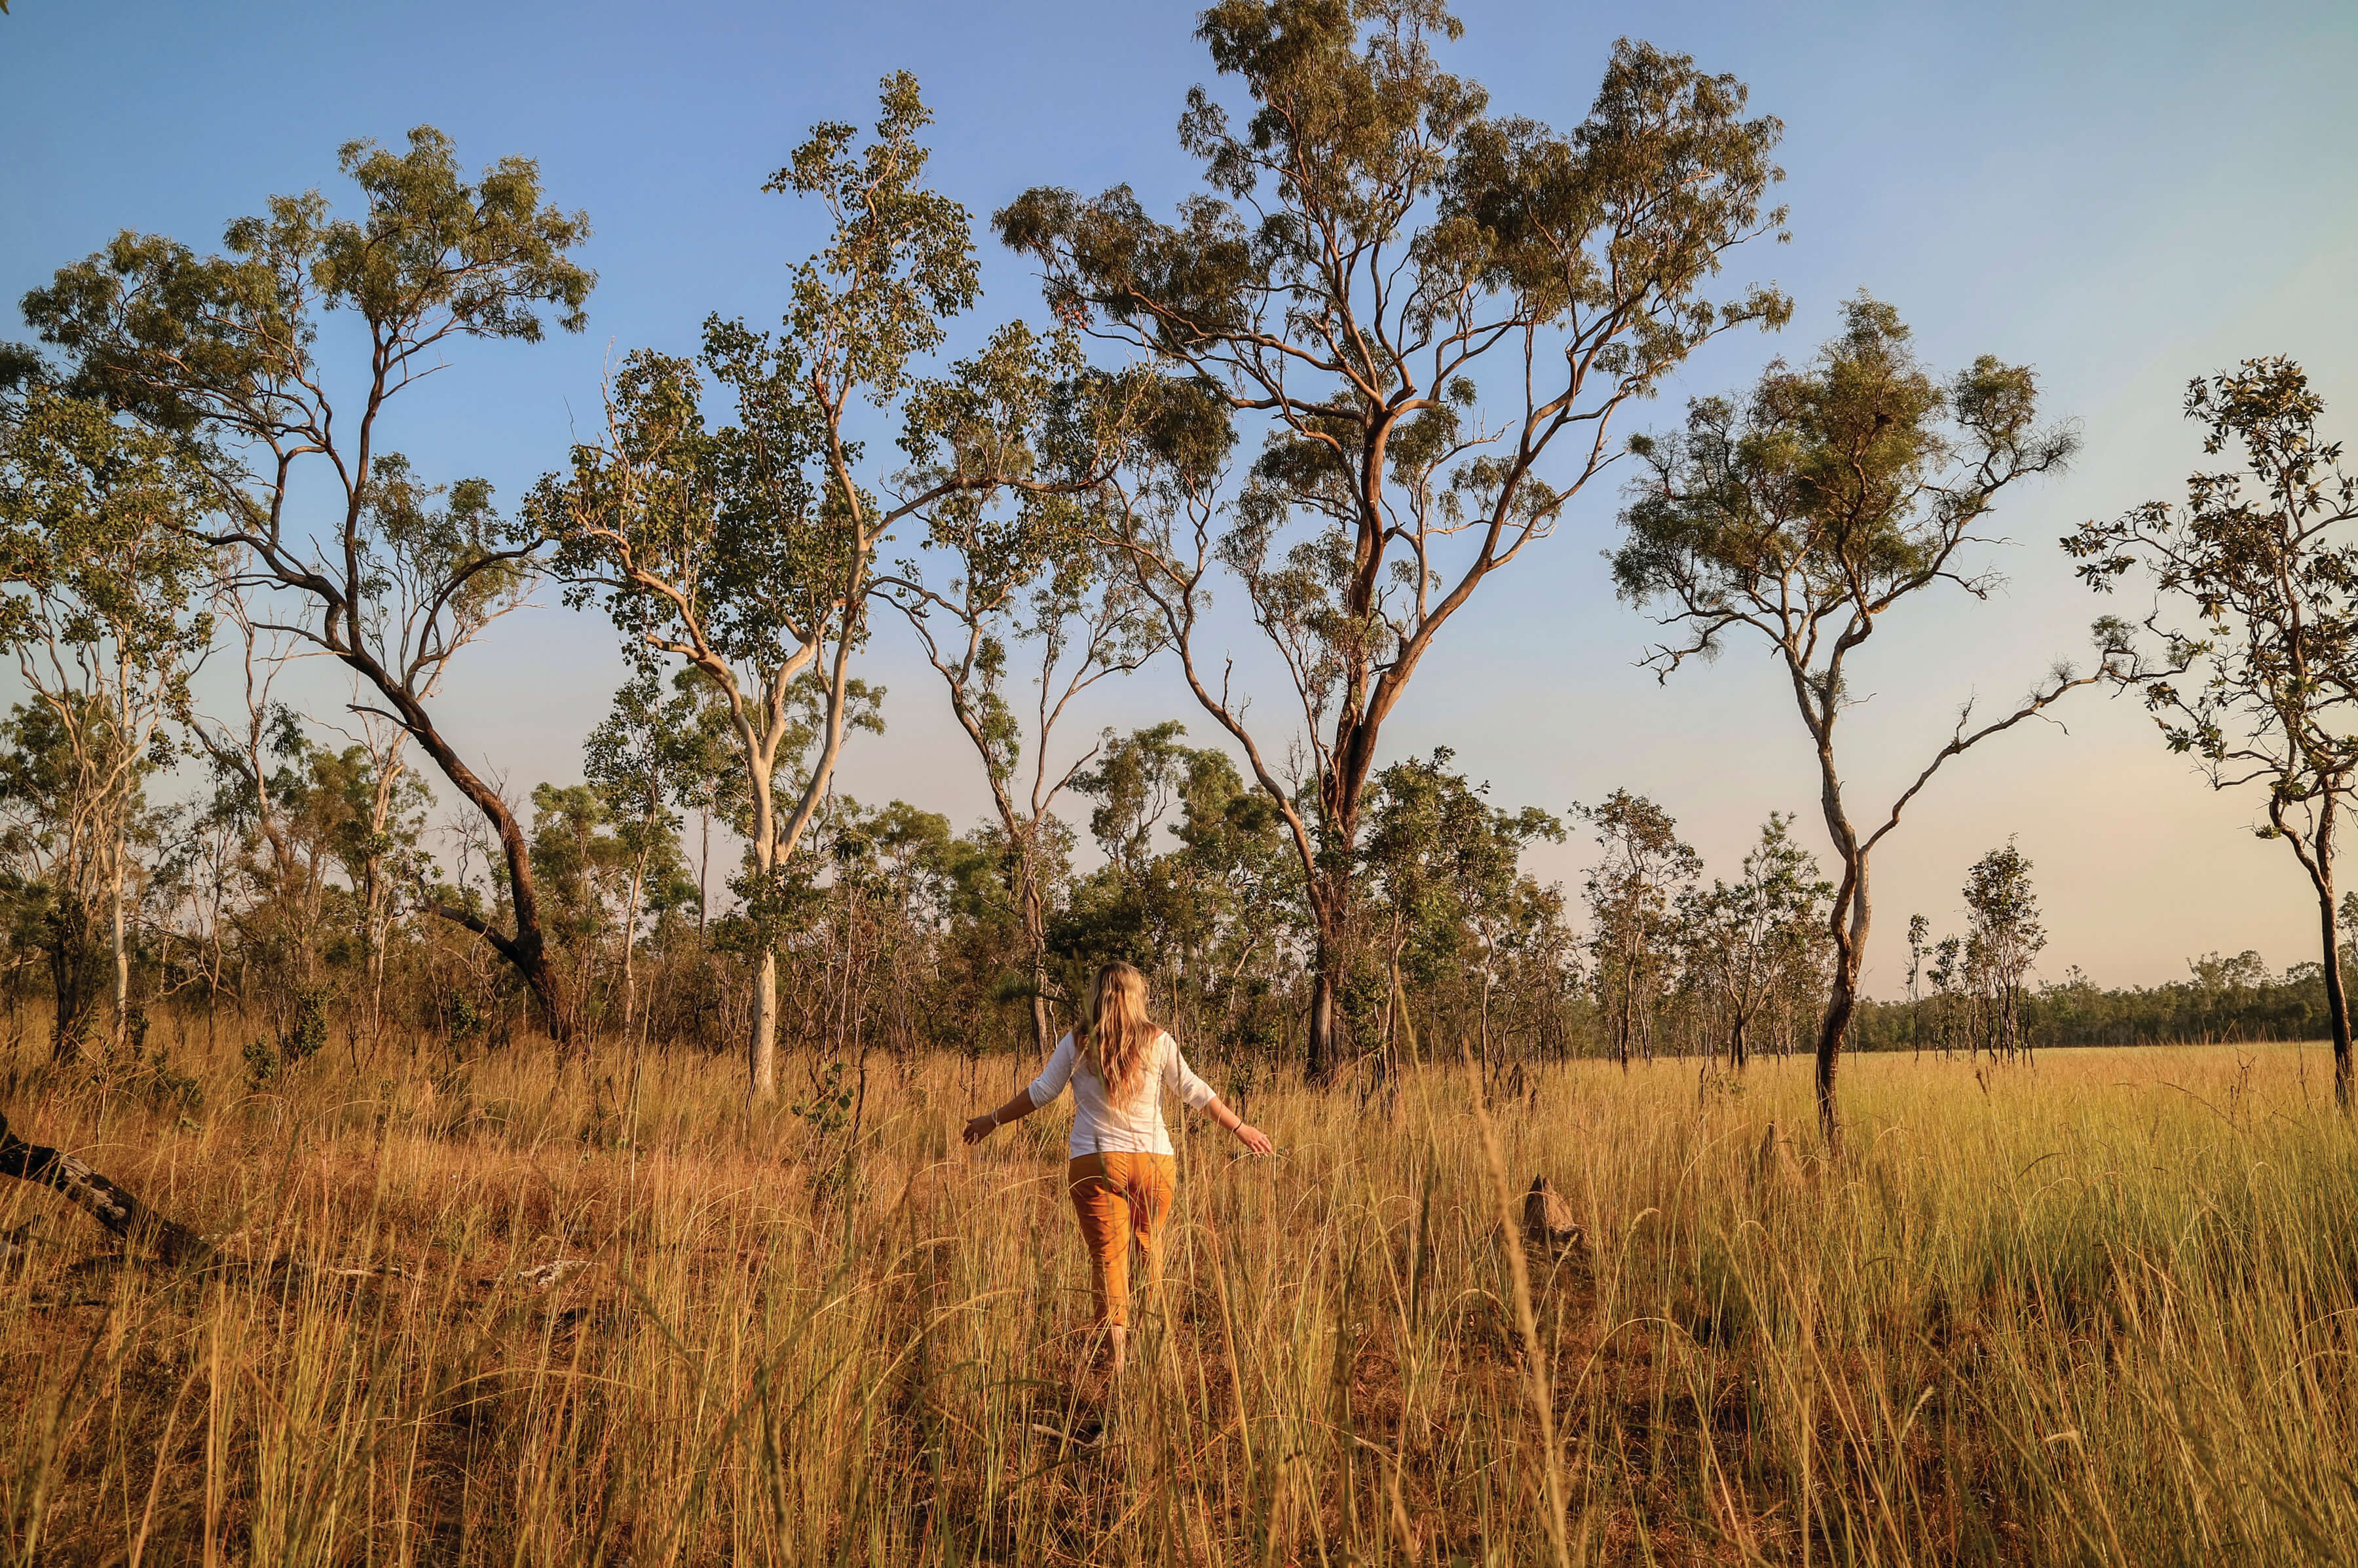 Wandering through the grass in the outback